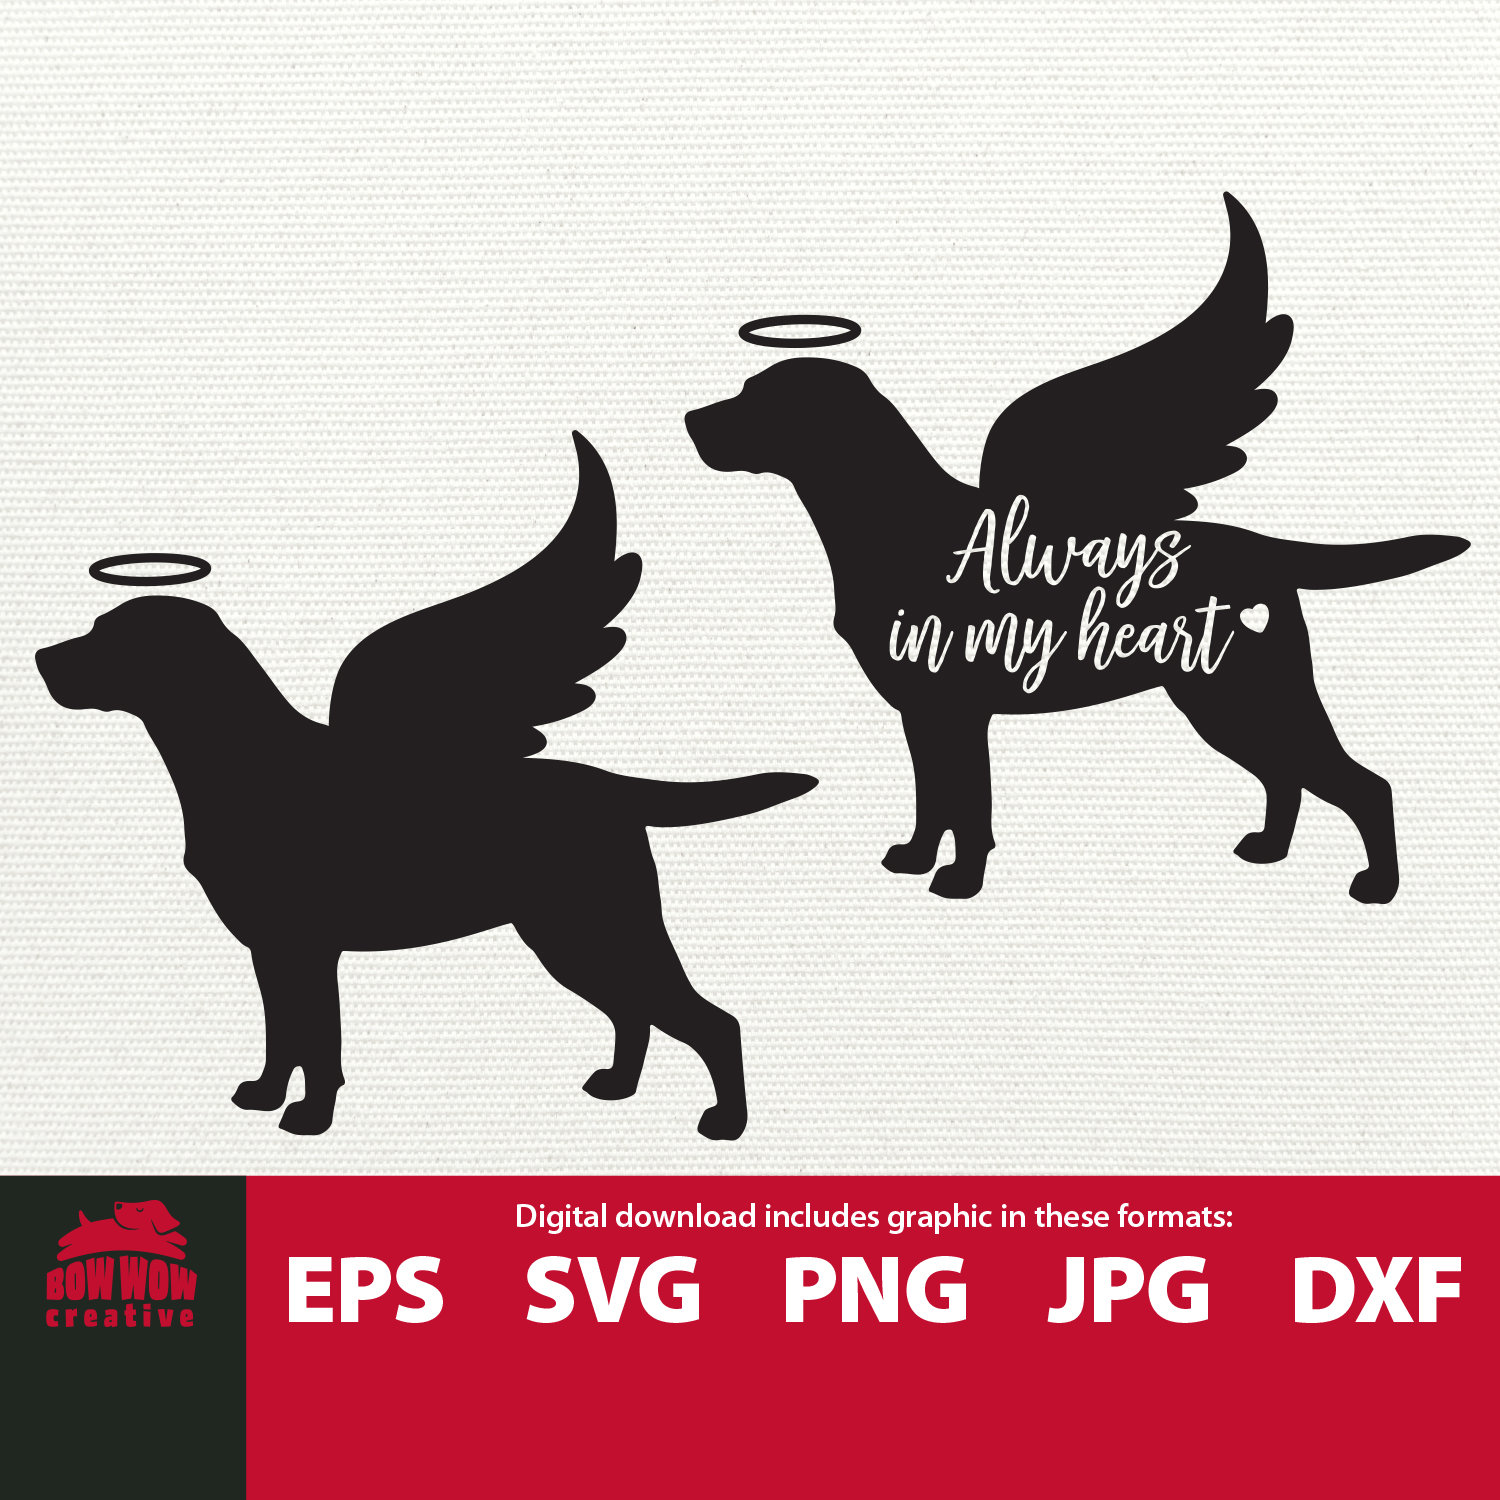 Pet Memorial, Angel Wings Labrador Retriever Dog Silhouette Vector Royalty  Free SVG, Cliparts, Vectors, and Stock Illustration. Image 158214447.